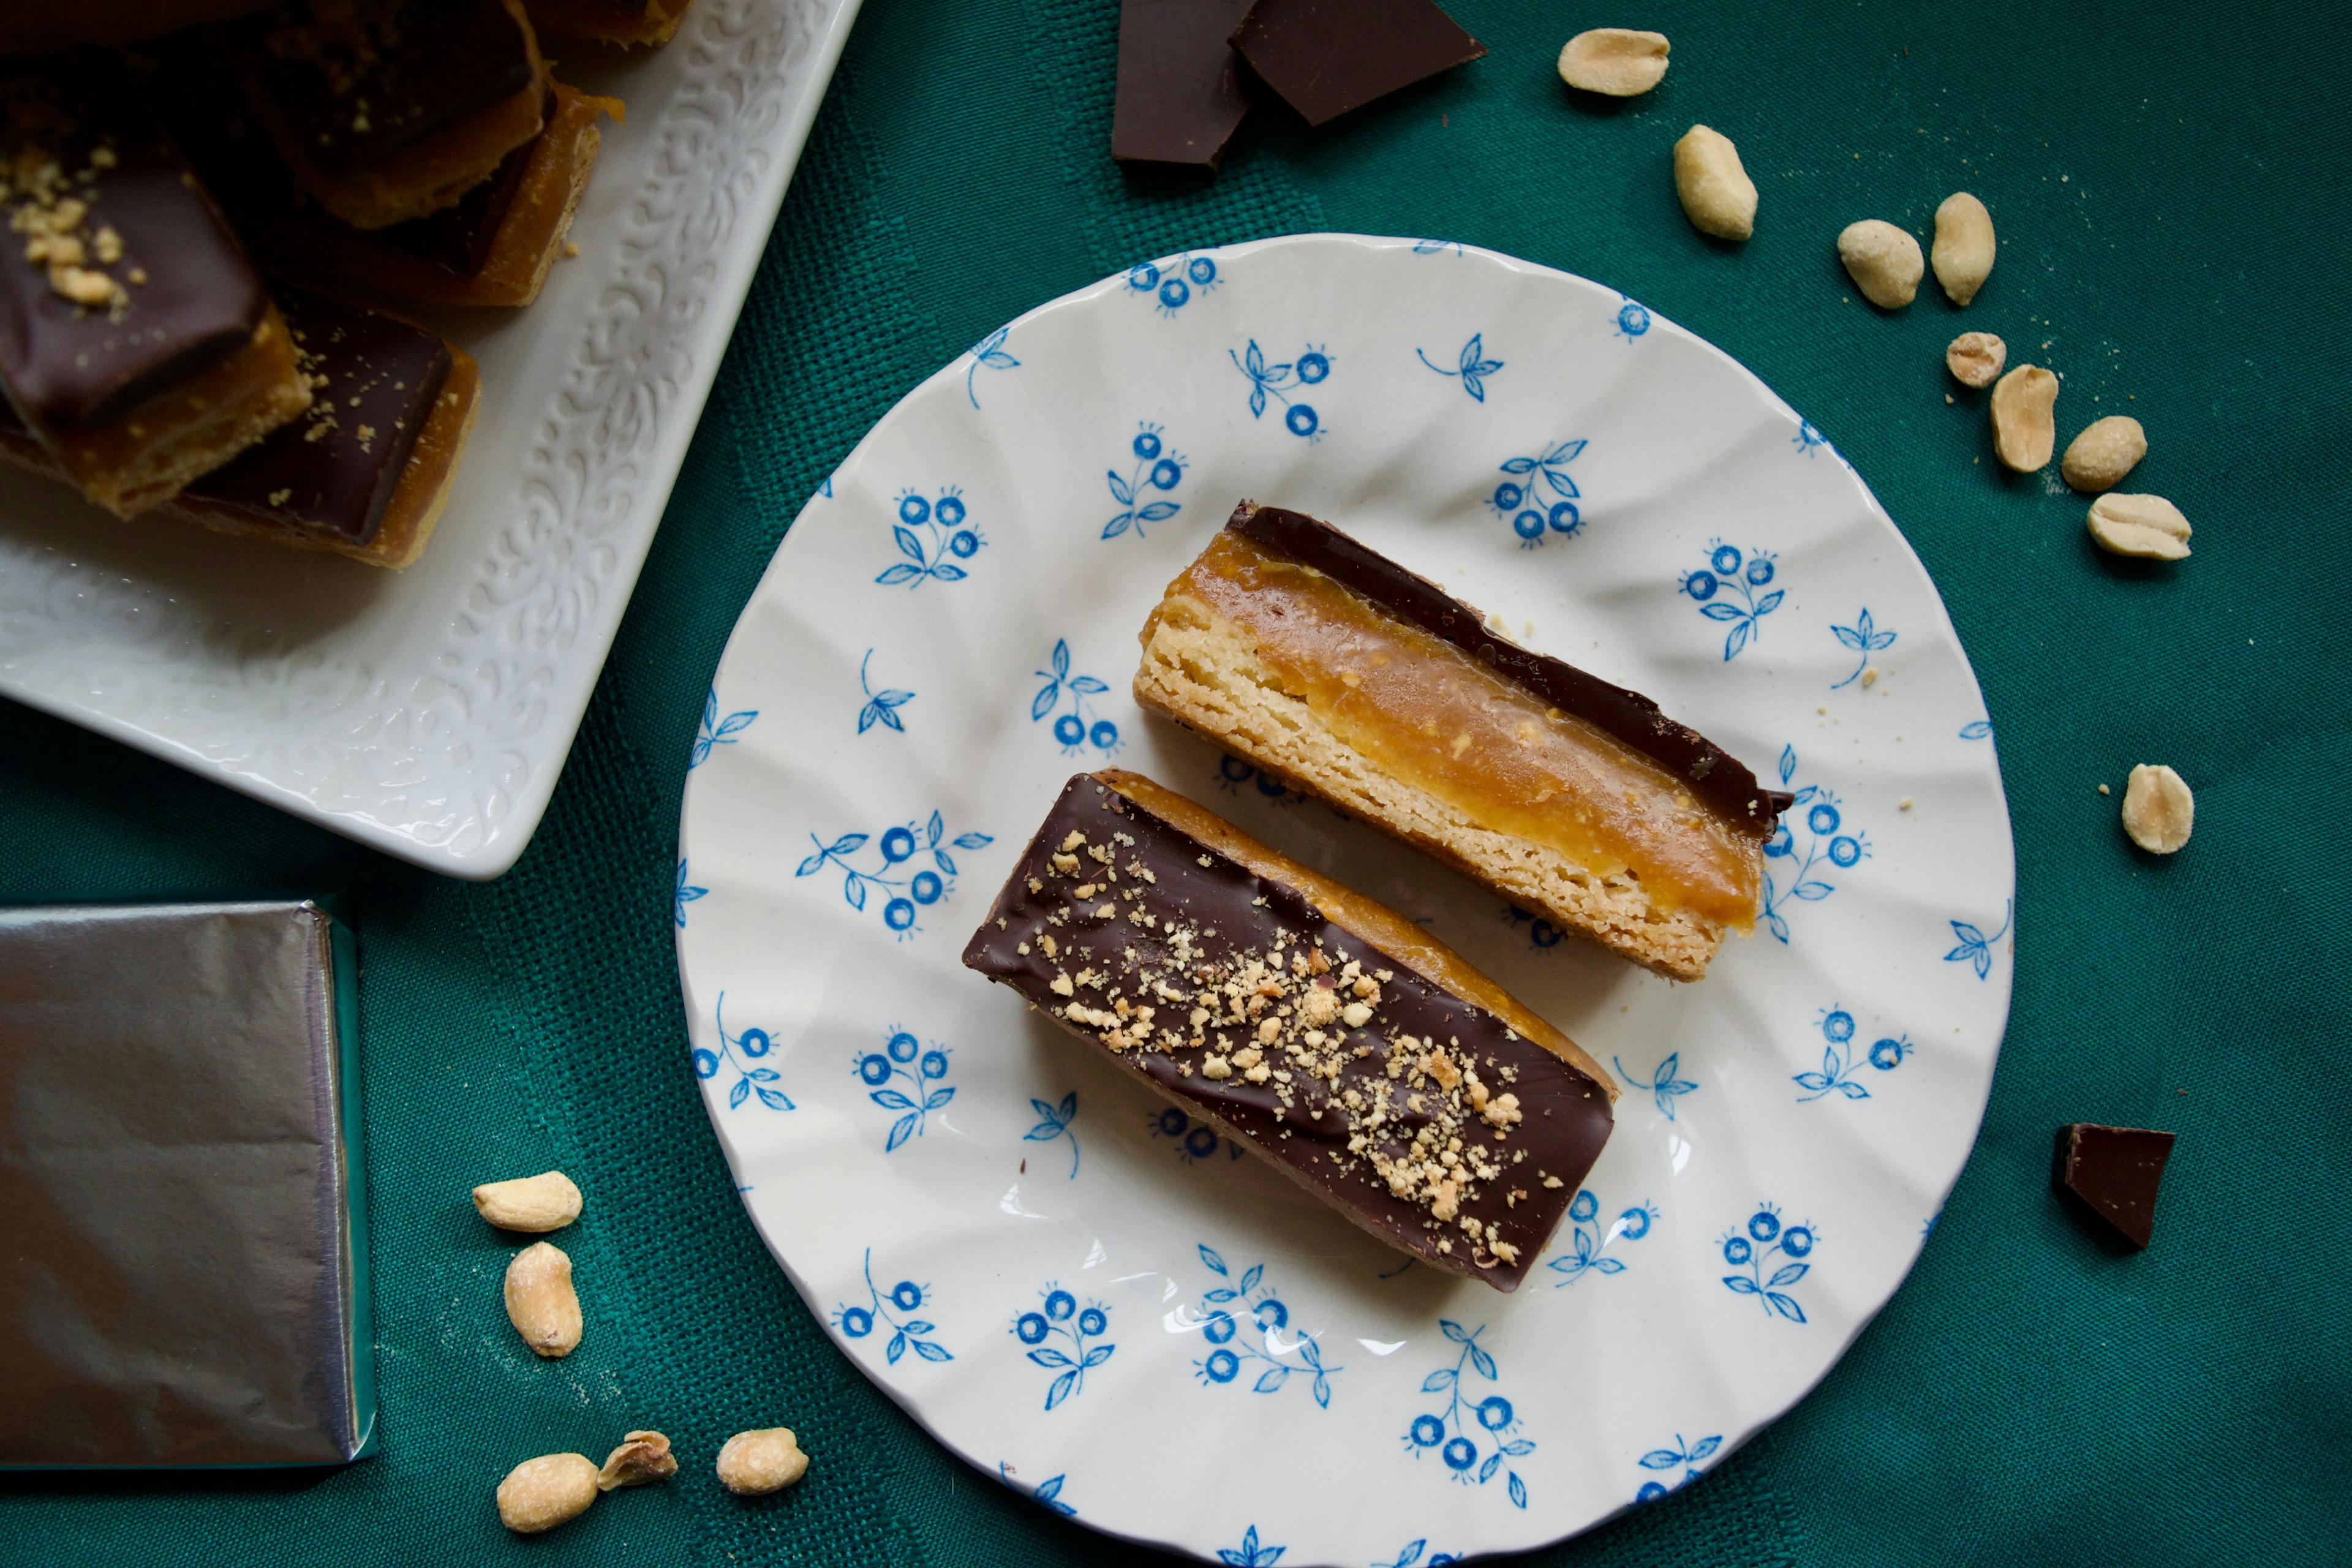 A plate of millionaire shortbreads on a green tablecloth